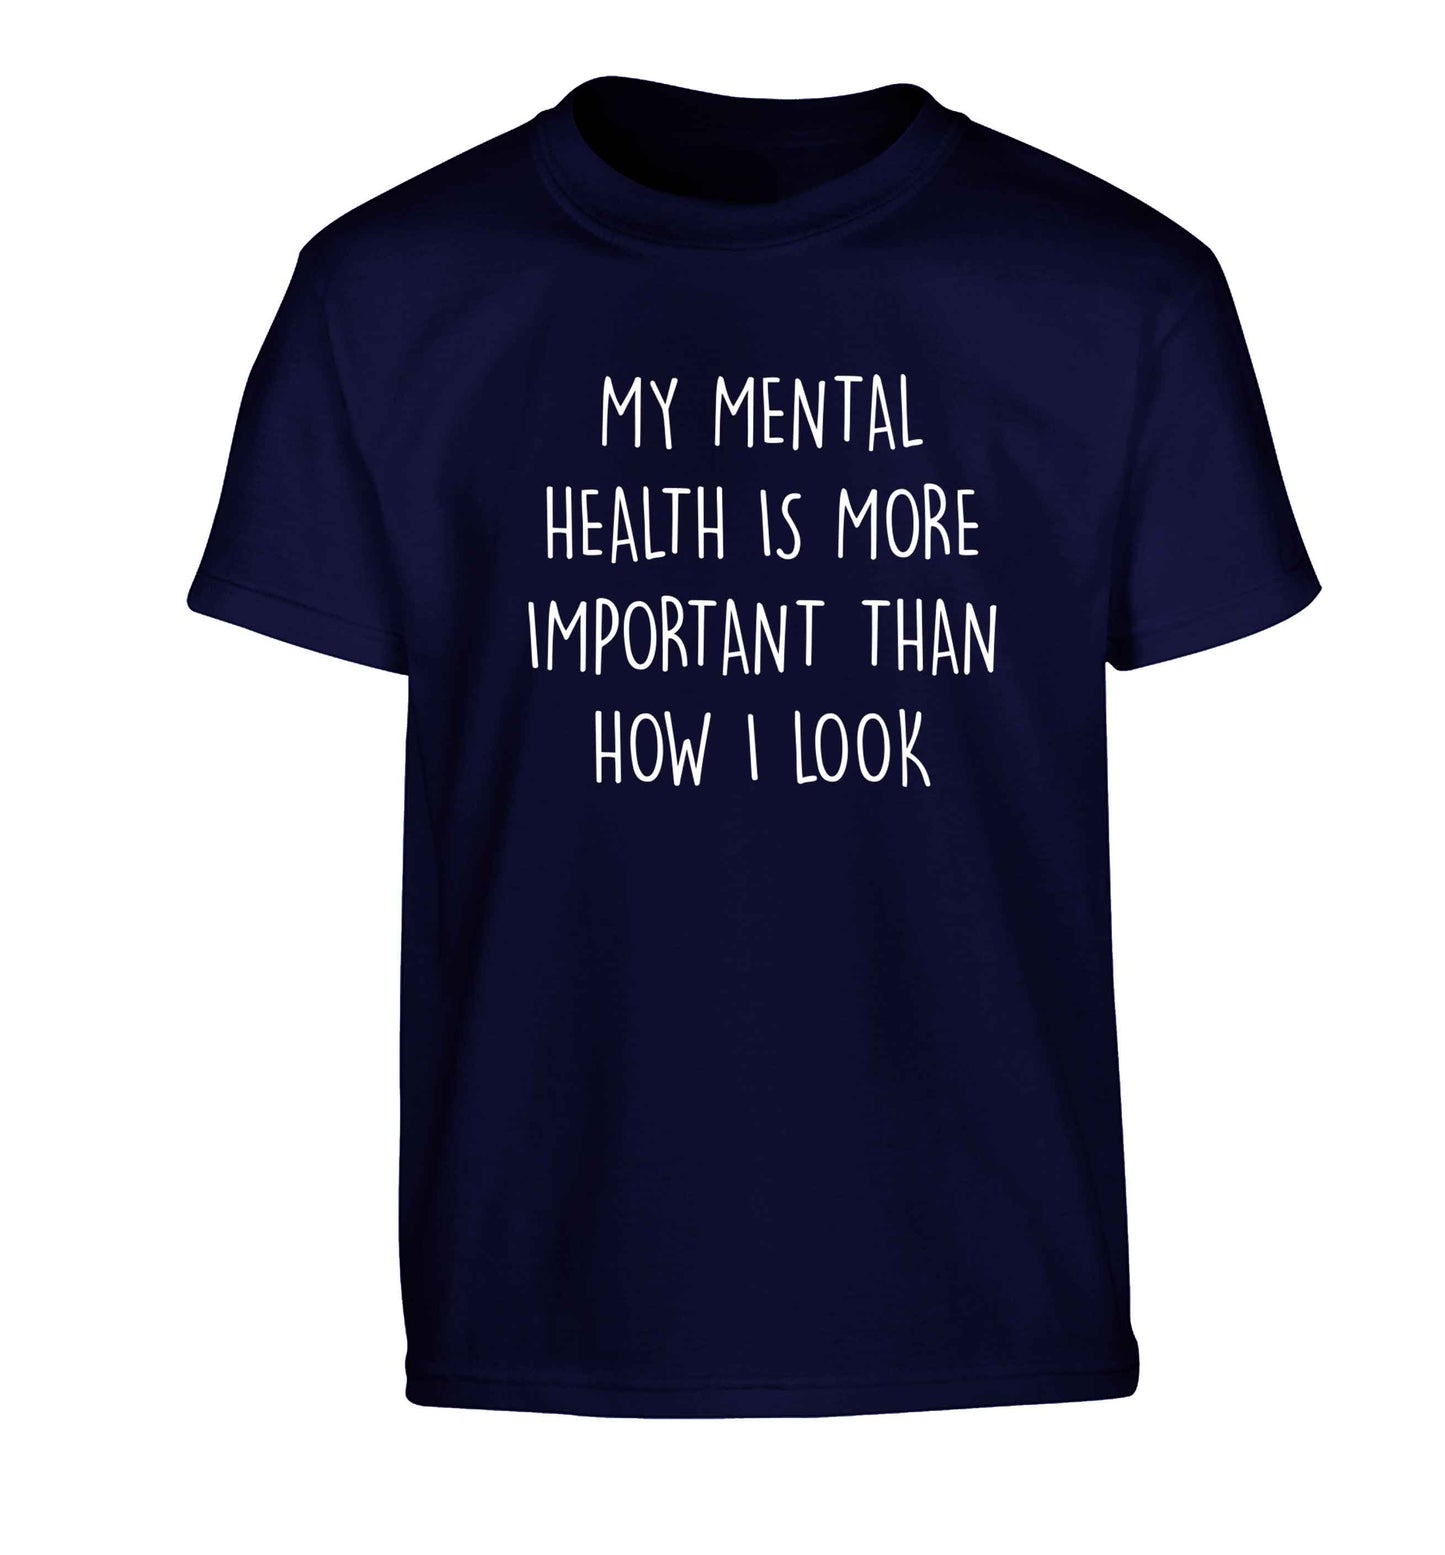 My mental health is more importnat than how I look Children's navy Tshirt 12-13 Years